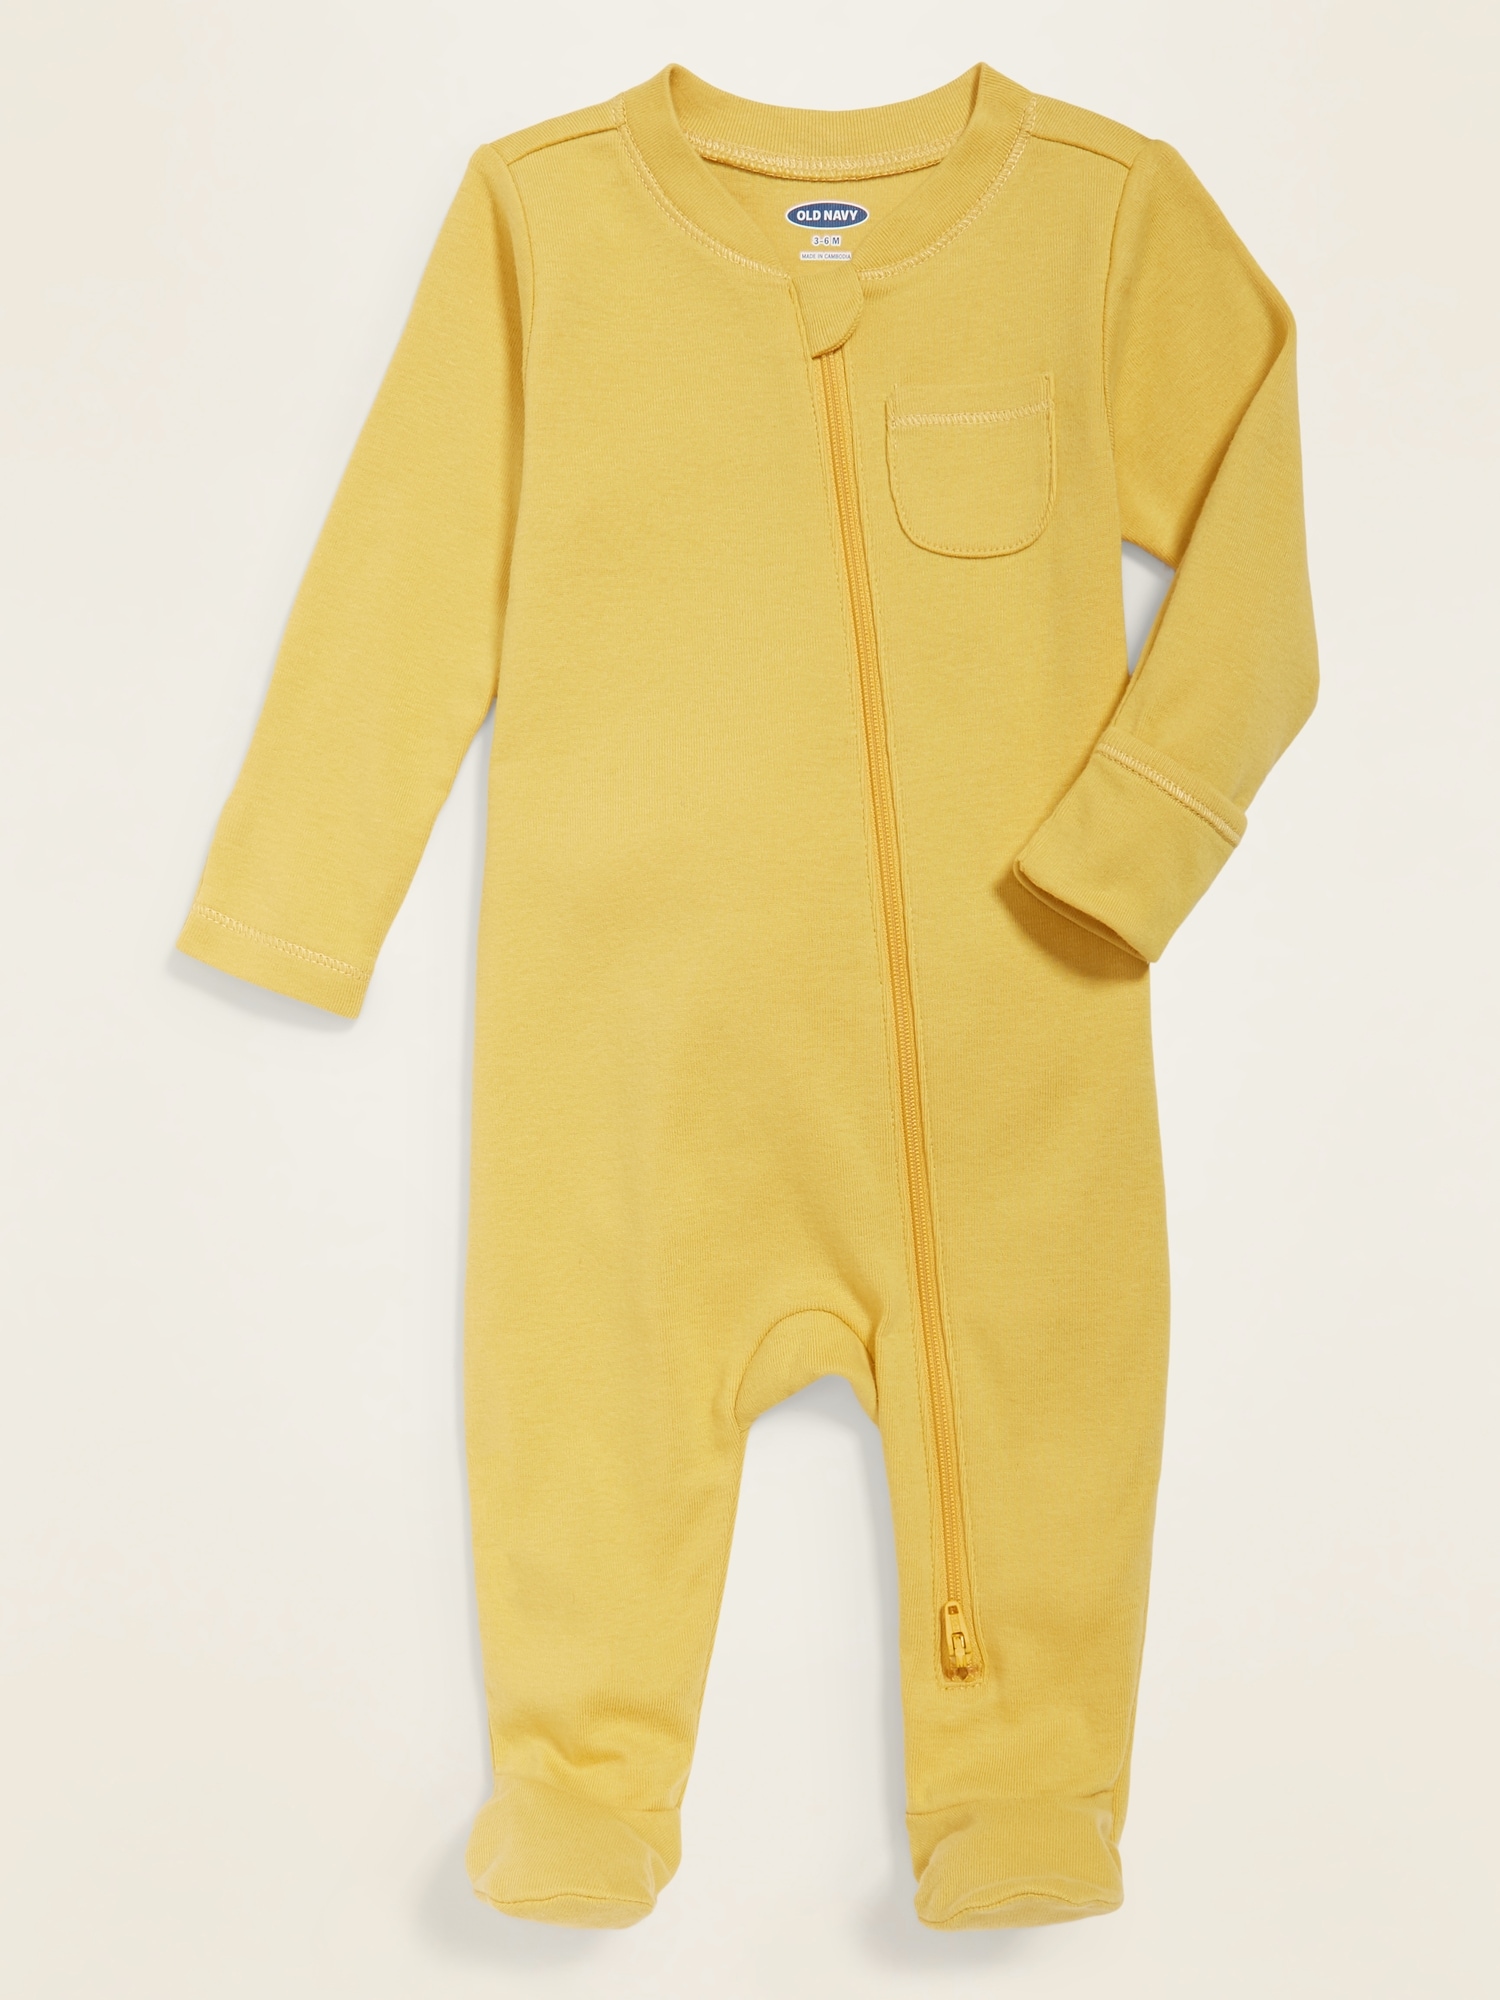 Unisex Sleep & Play Footed One-Piece for Baby | Old Navy